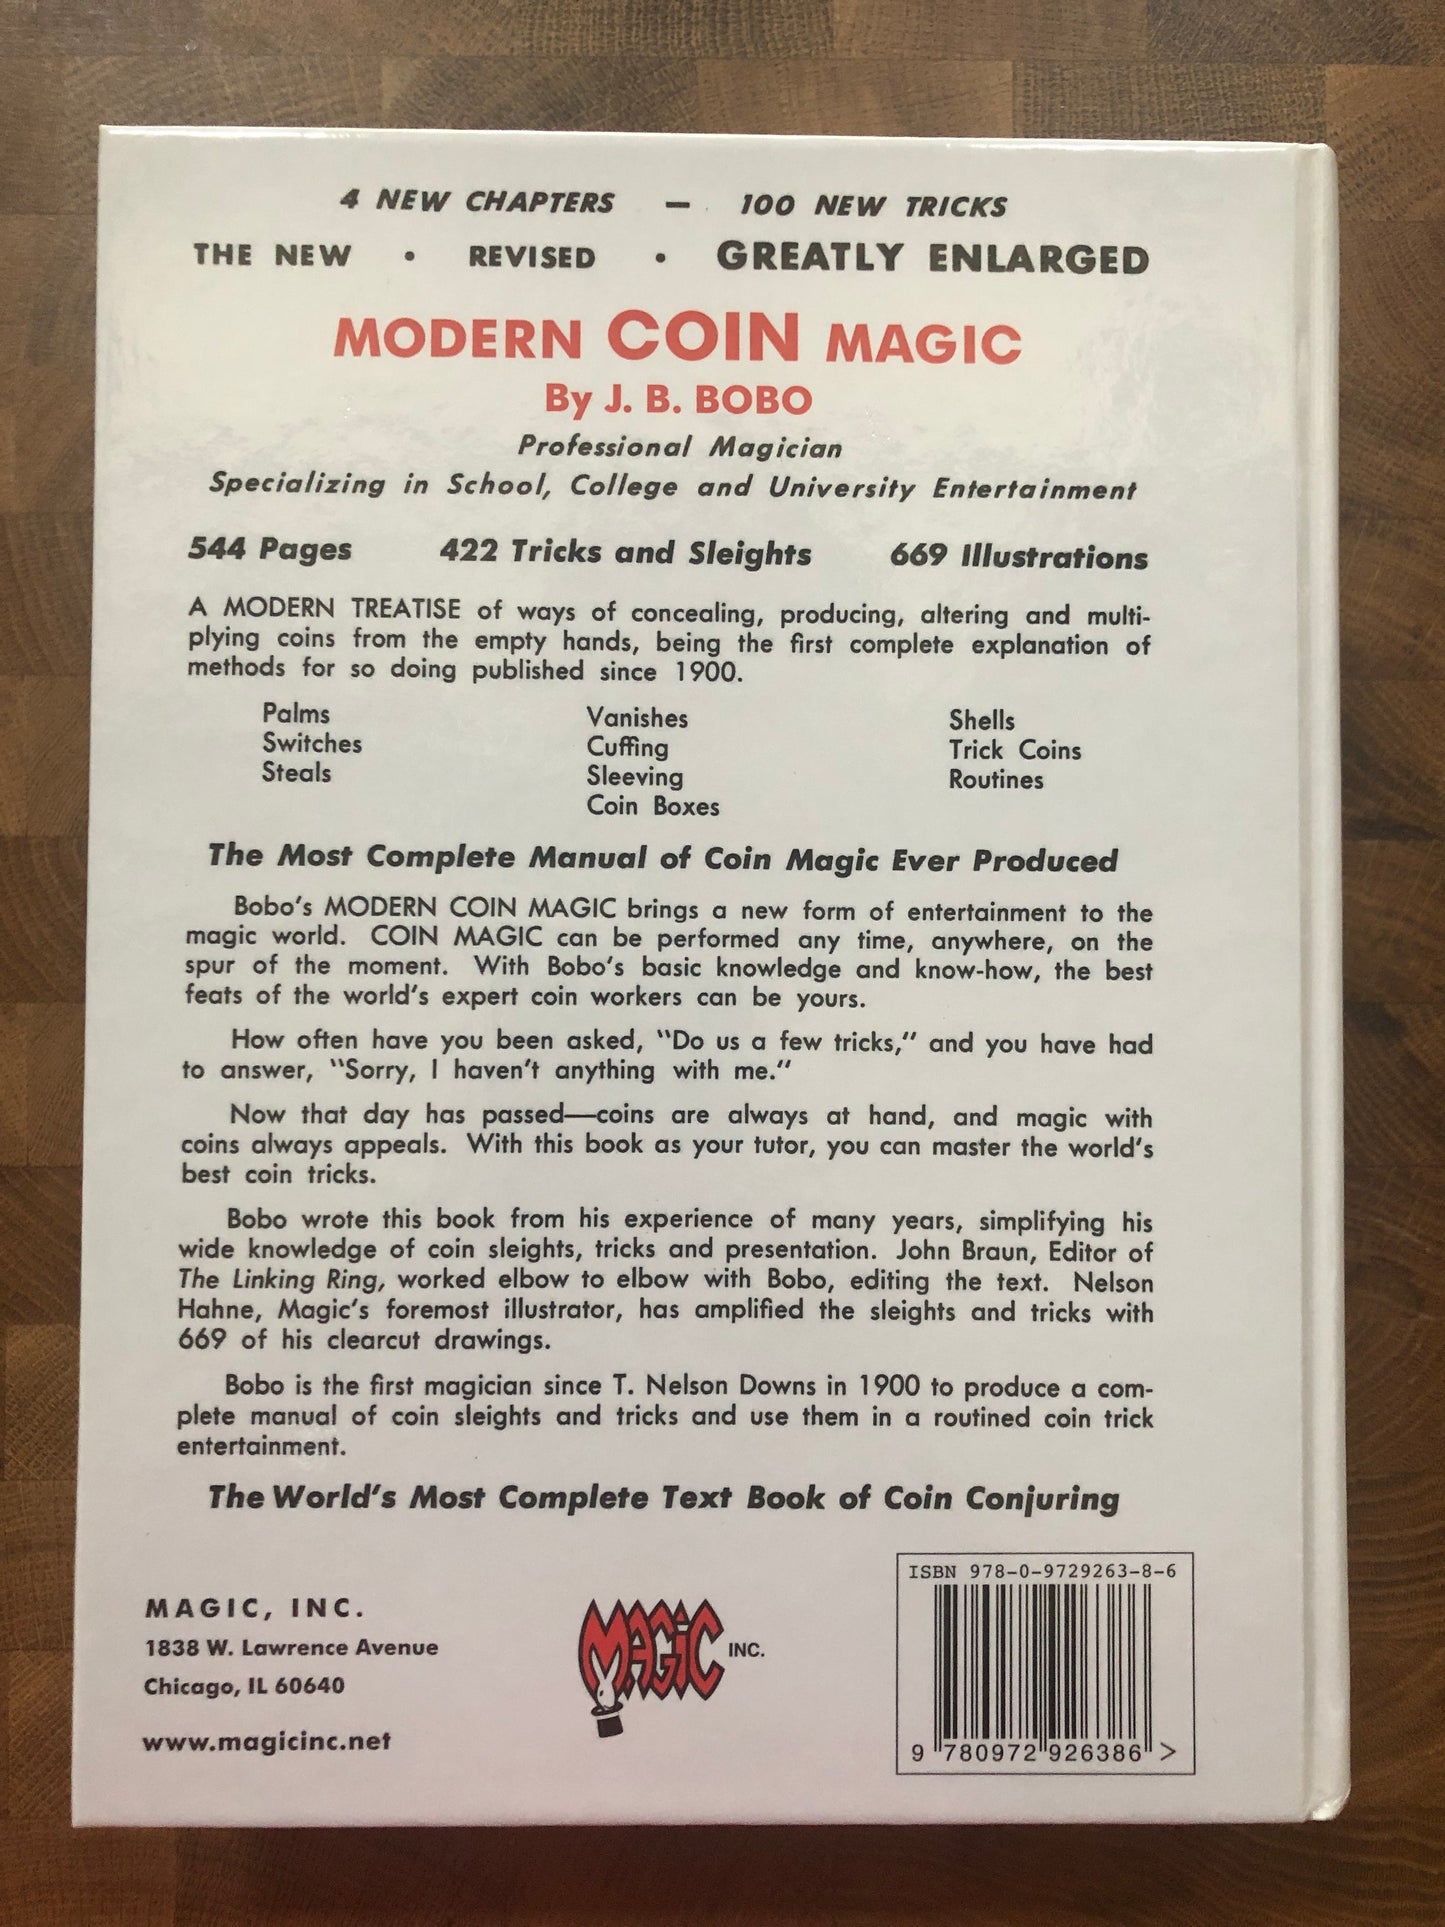 The New Modern Coin Magic - J.B. Bobo - Revised and Enlarged Edition